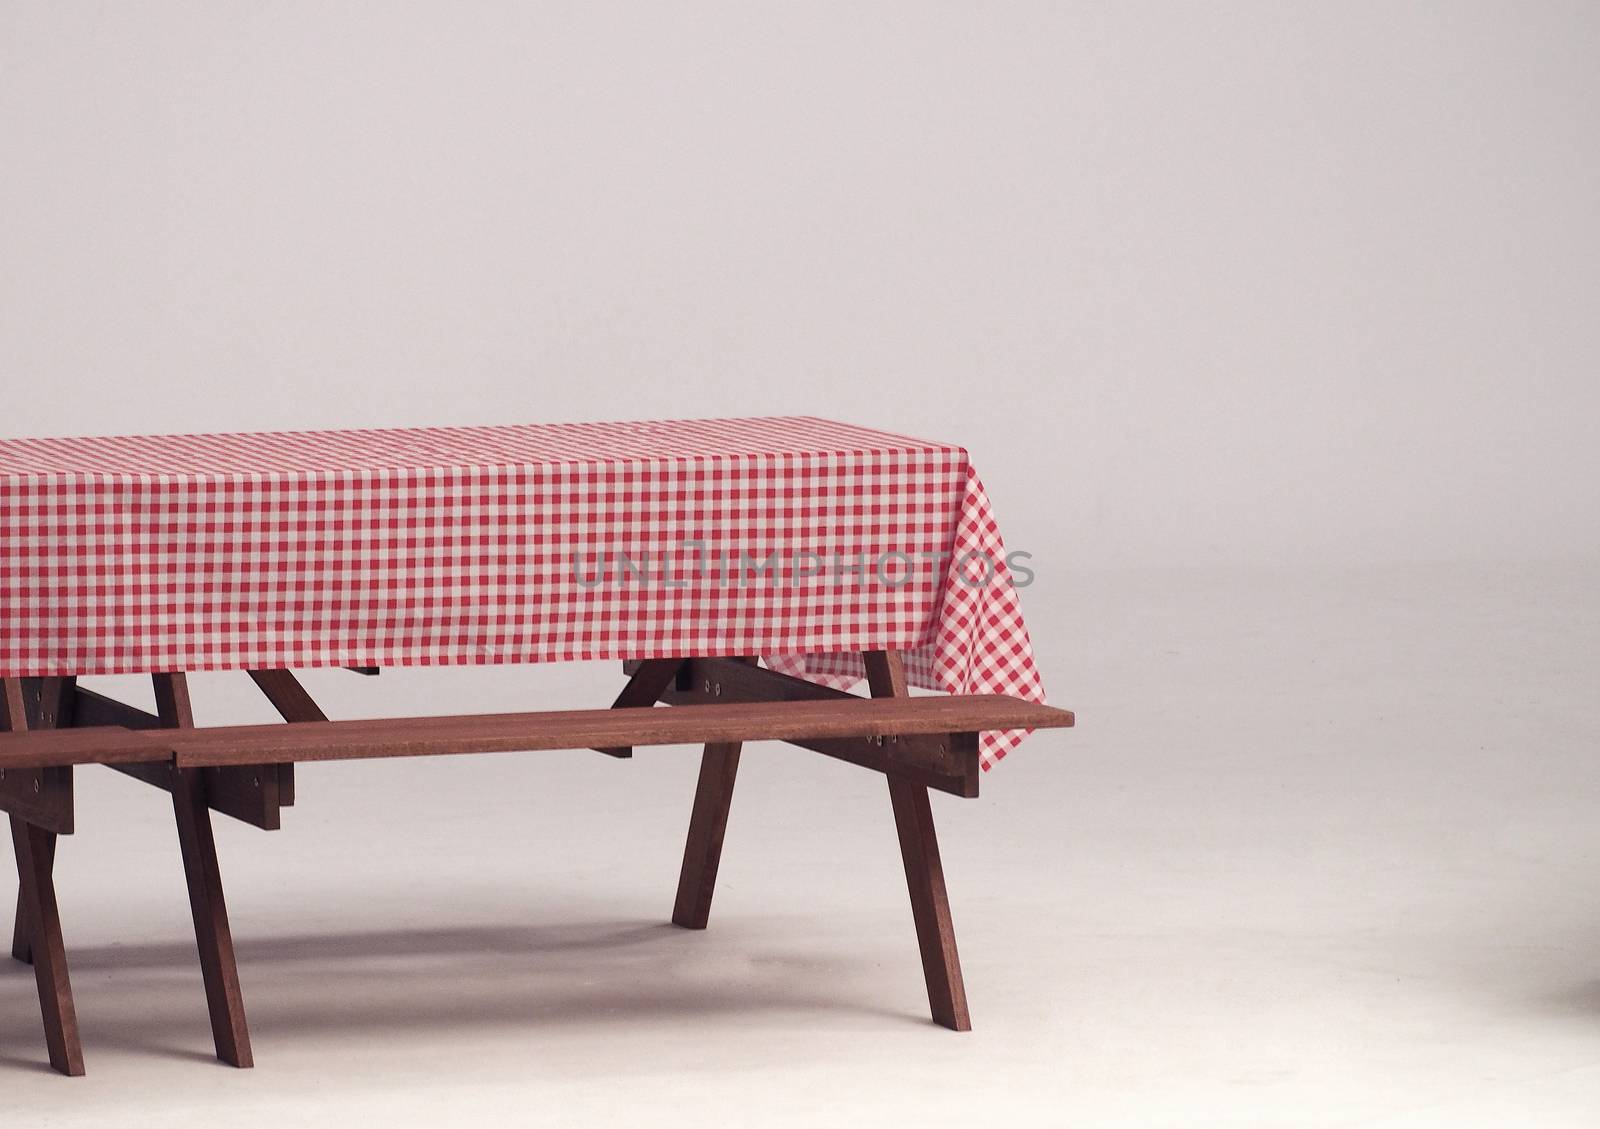 Wood table and red napkin for outdoor party and white background.